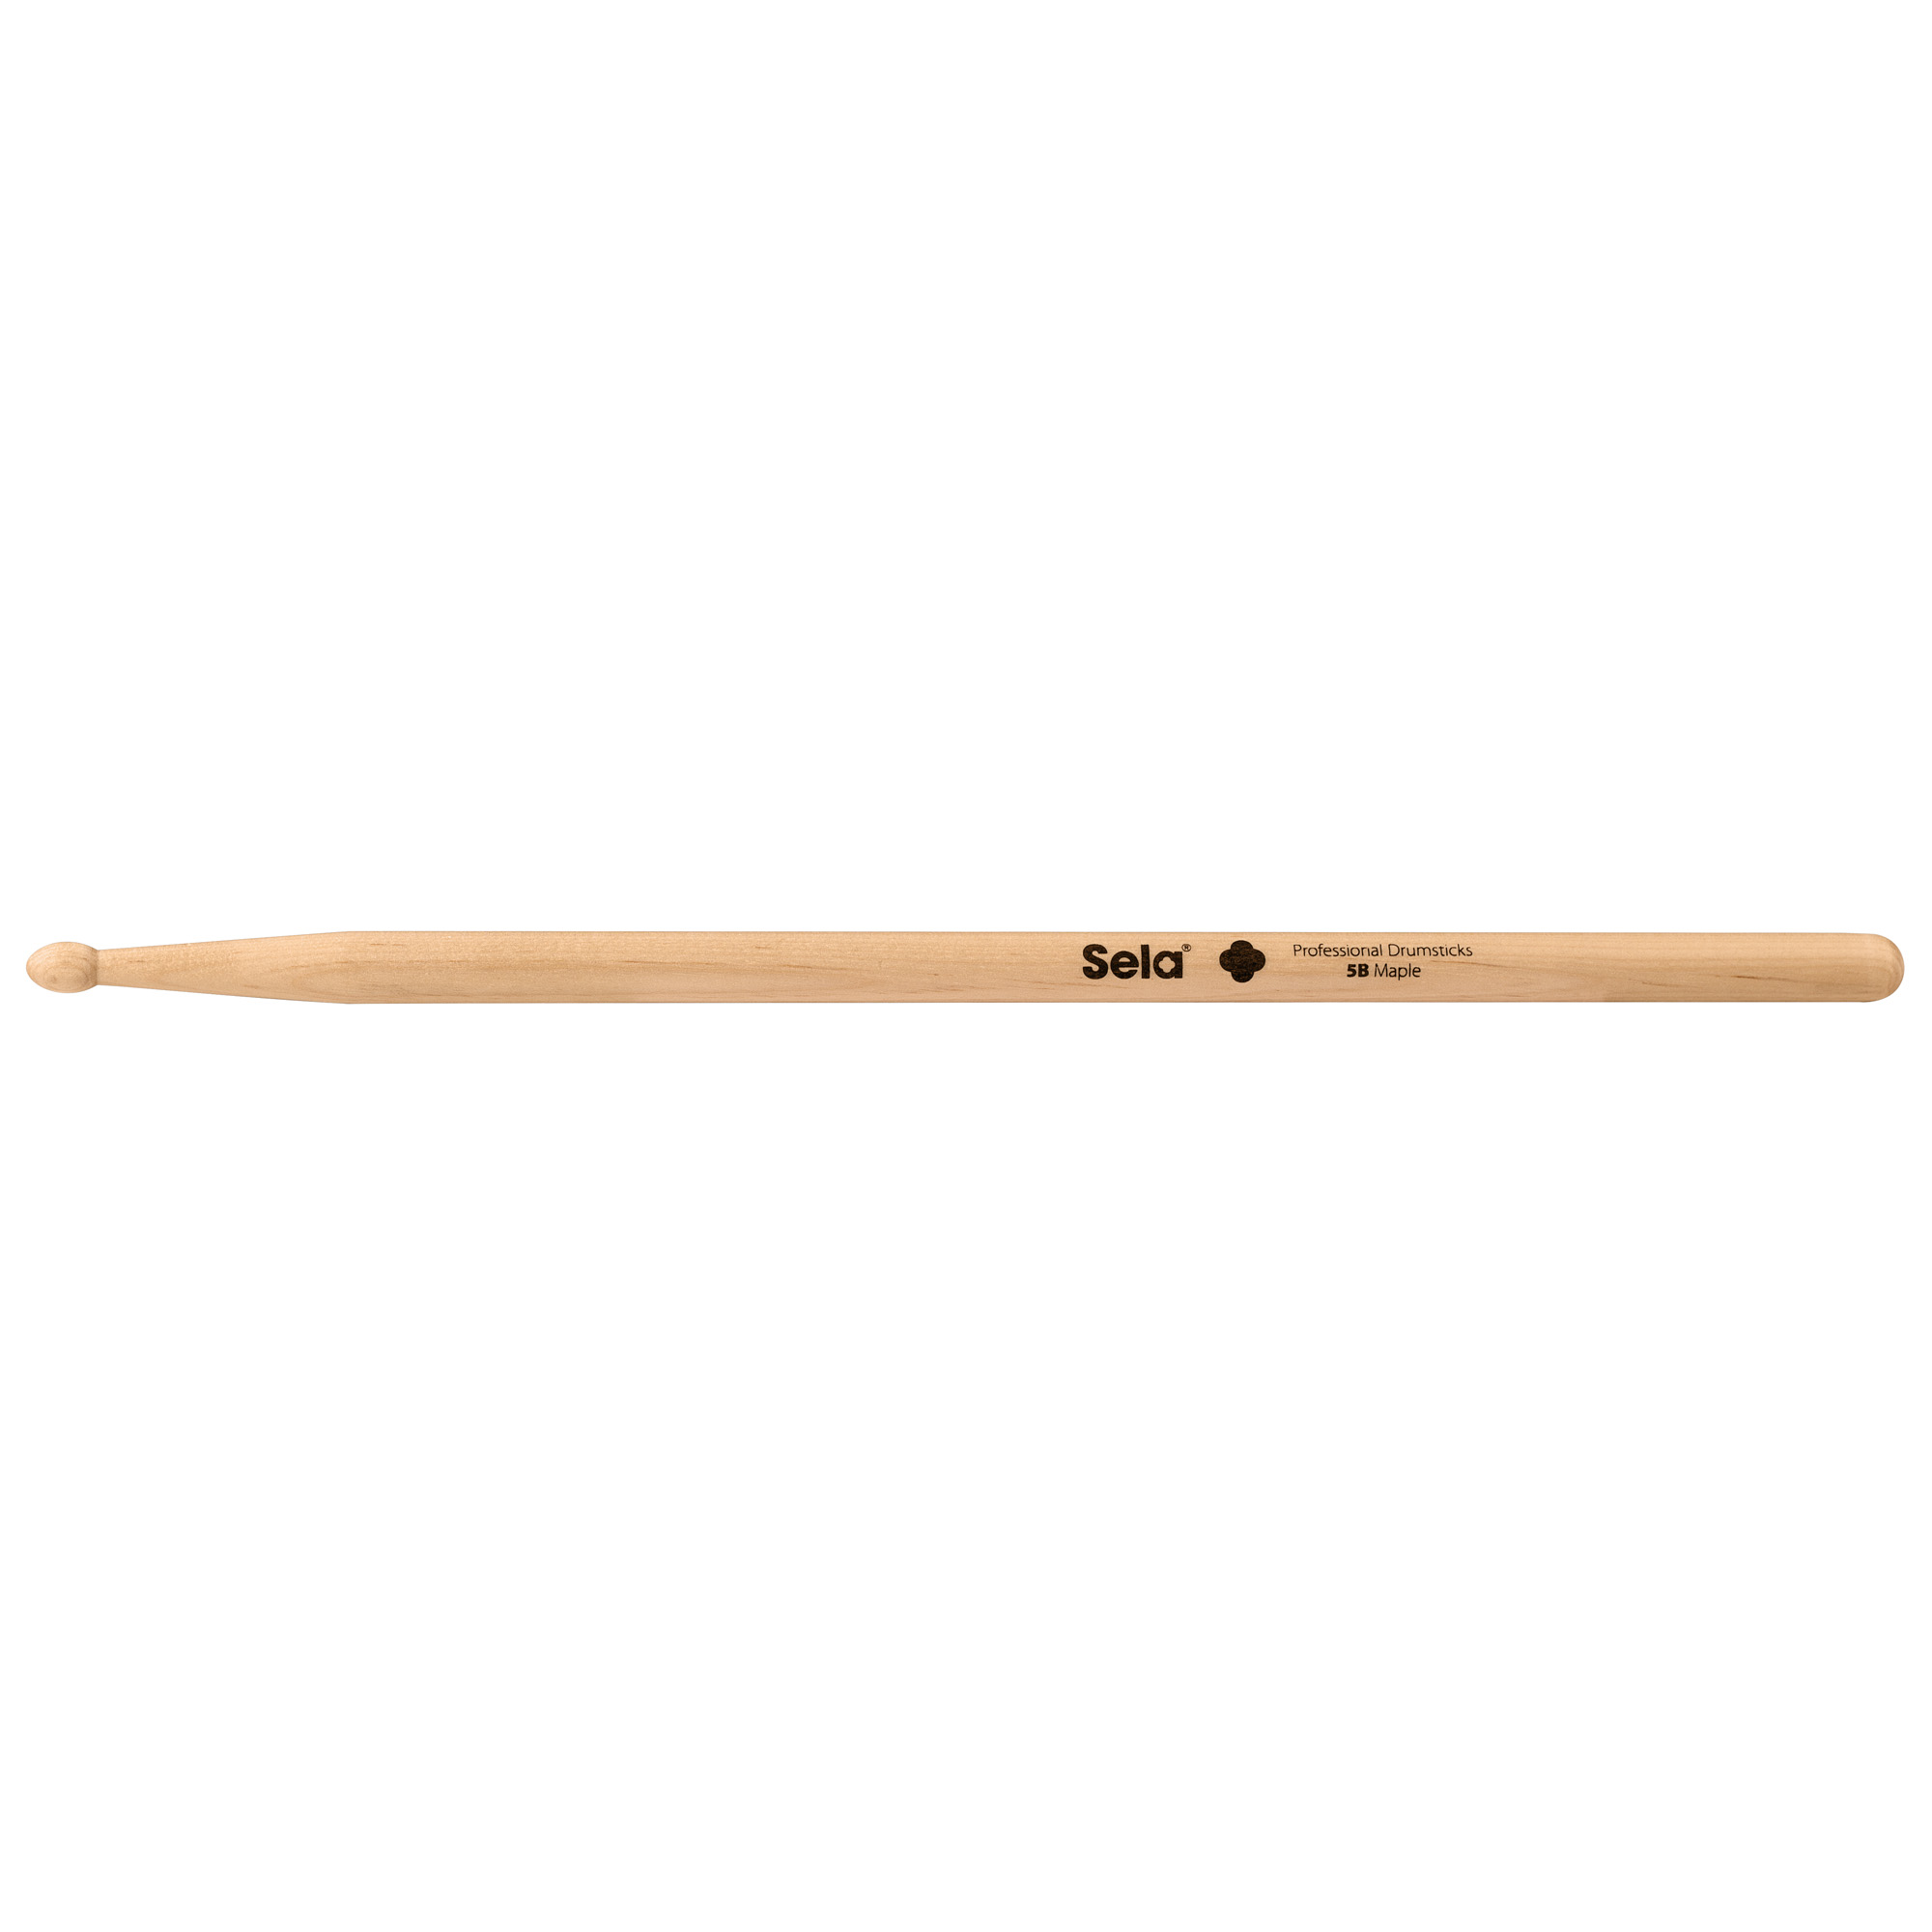 Professional Drumsticks 5B Maple (6 pair) Product Photos 2